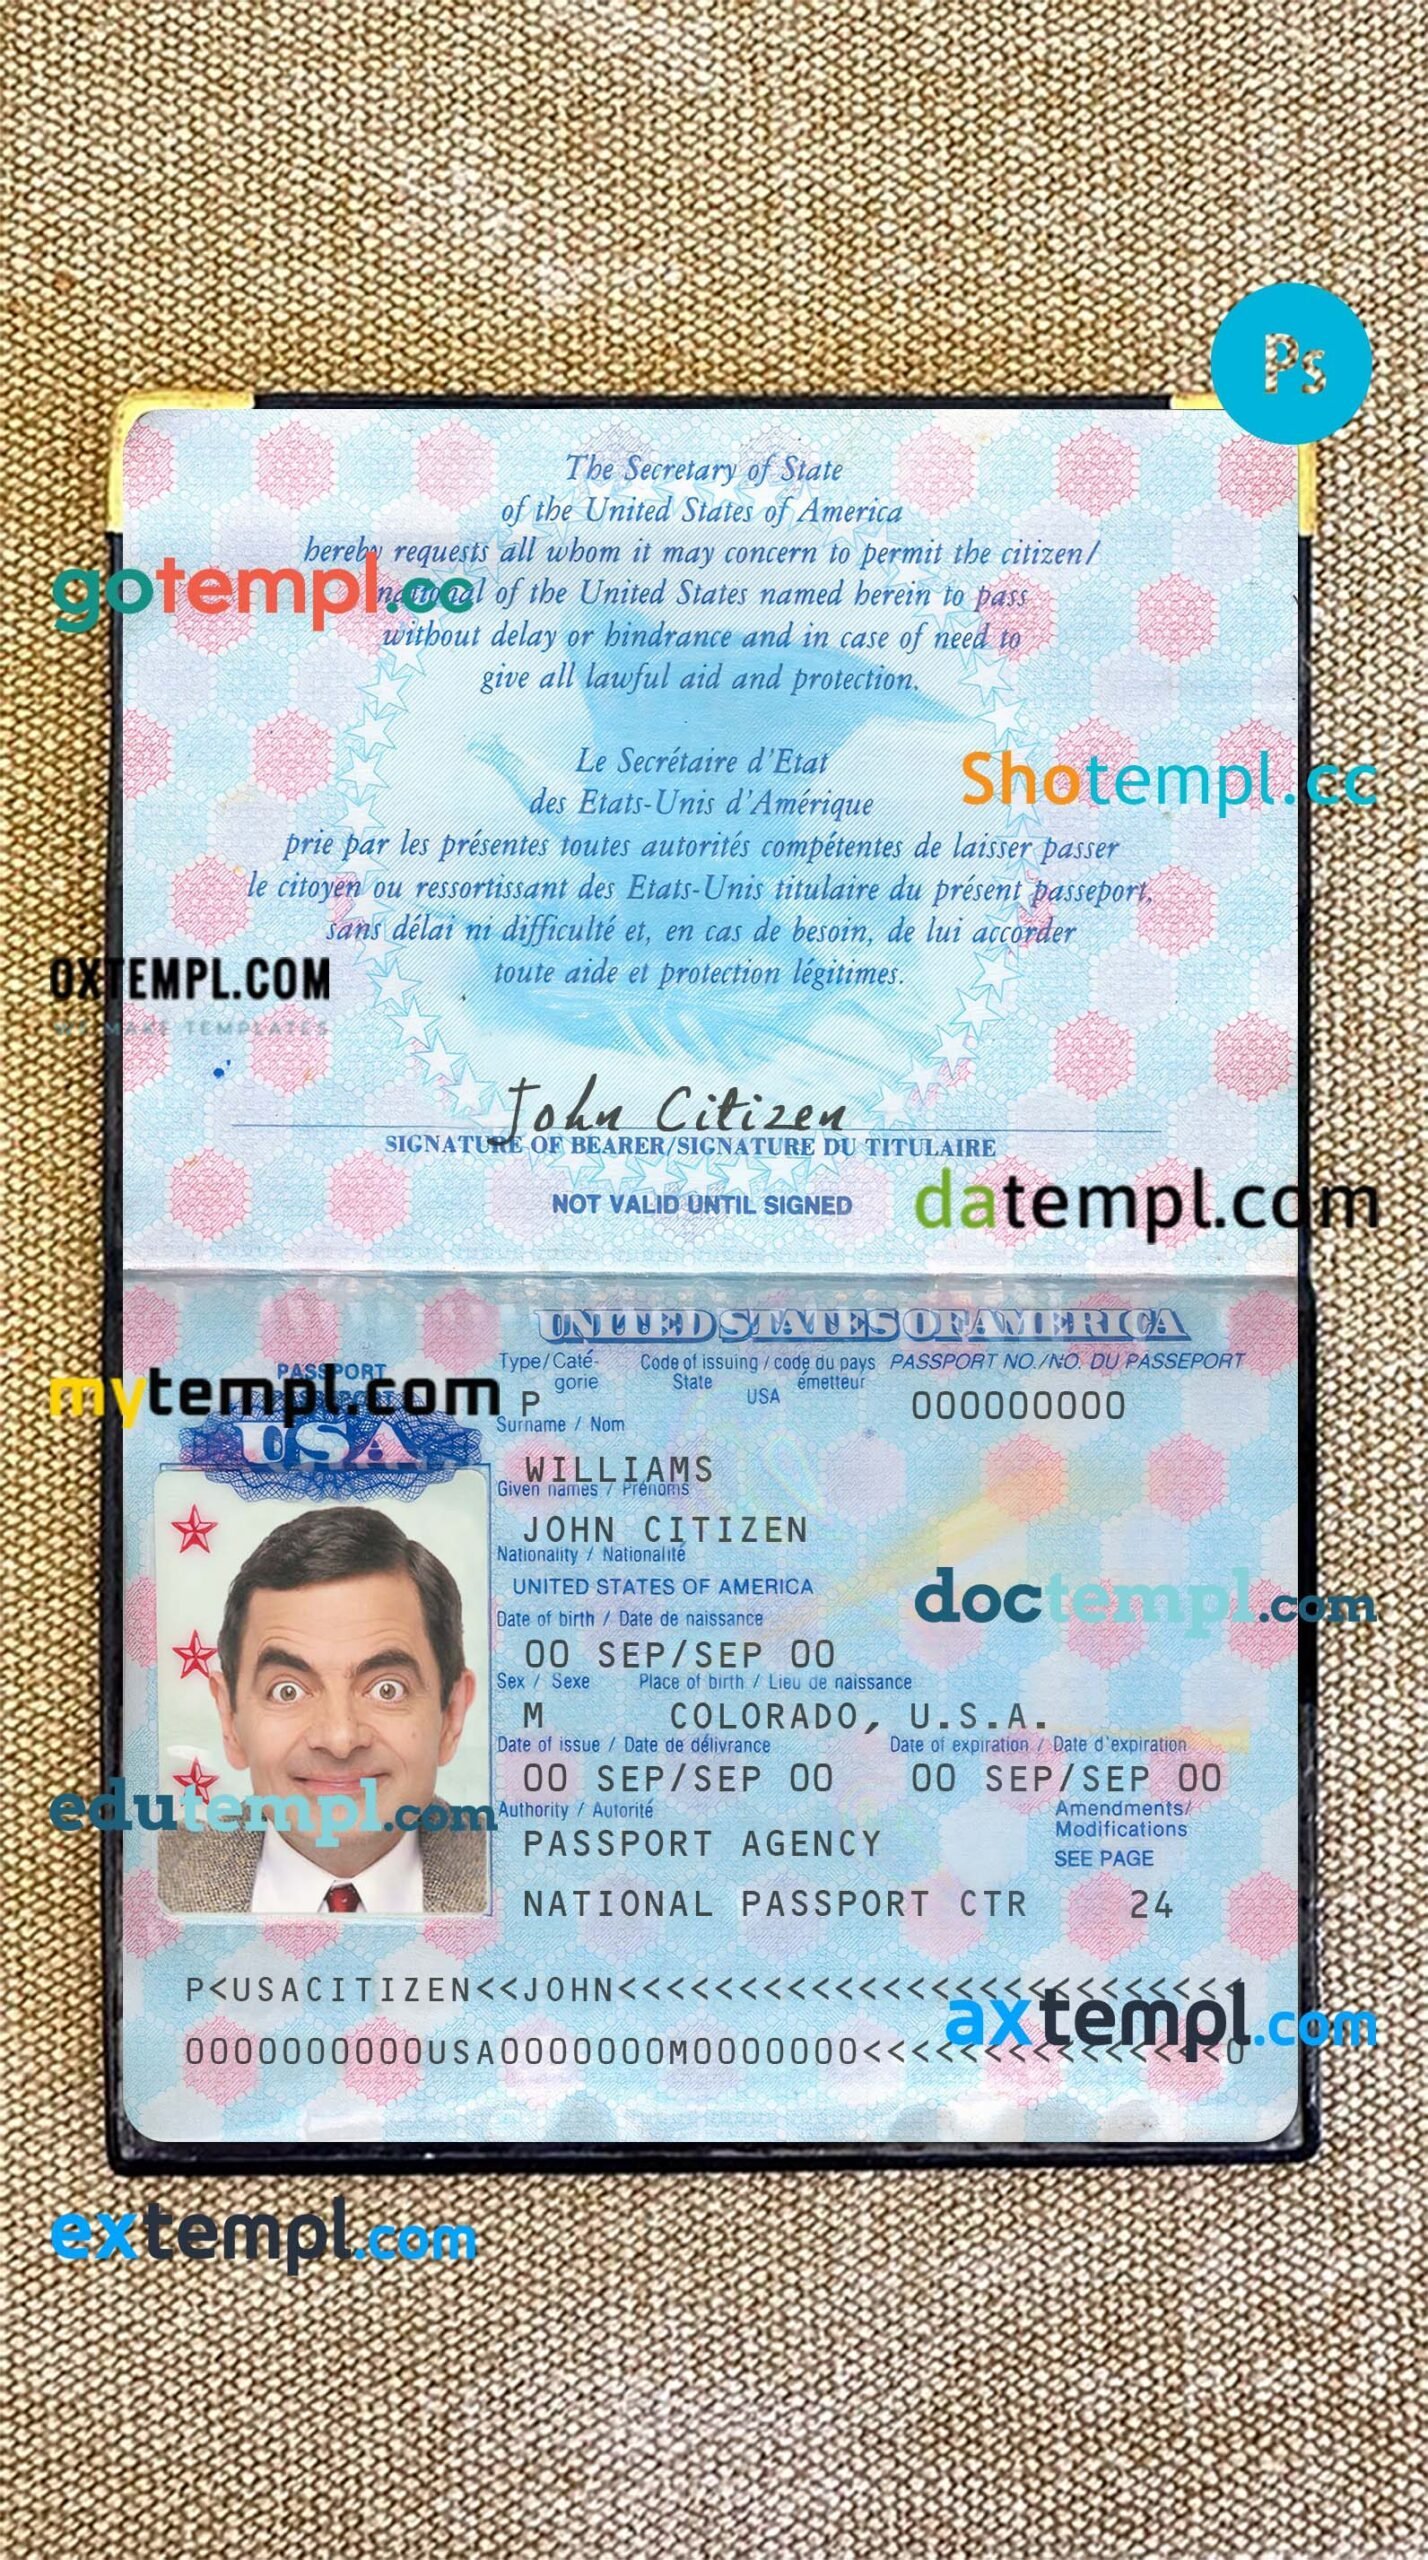 Kuwait passport PSD files, scan and photograghed image, 2 in 1